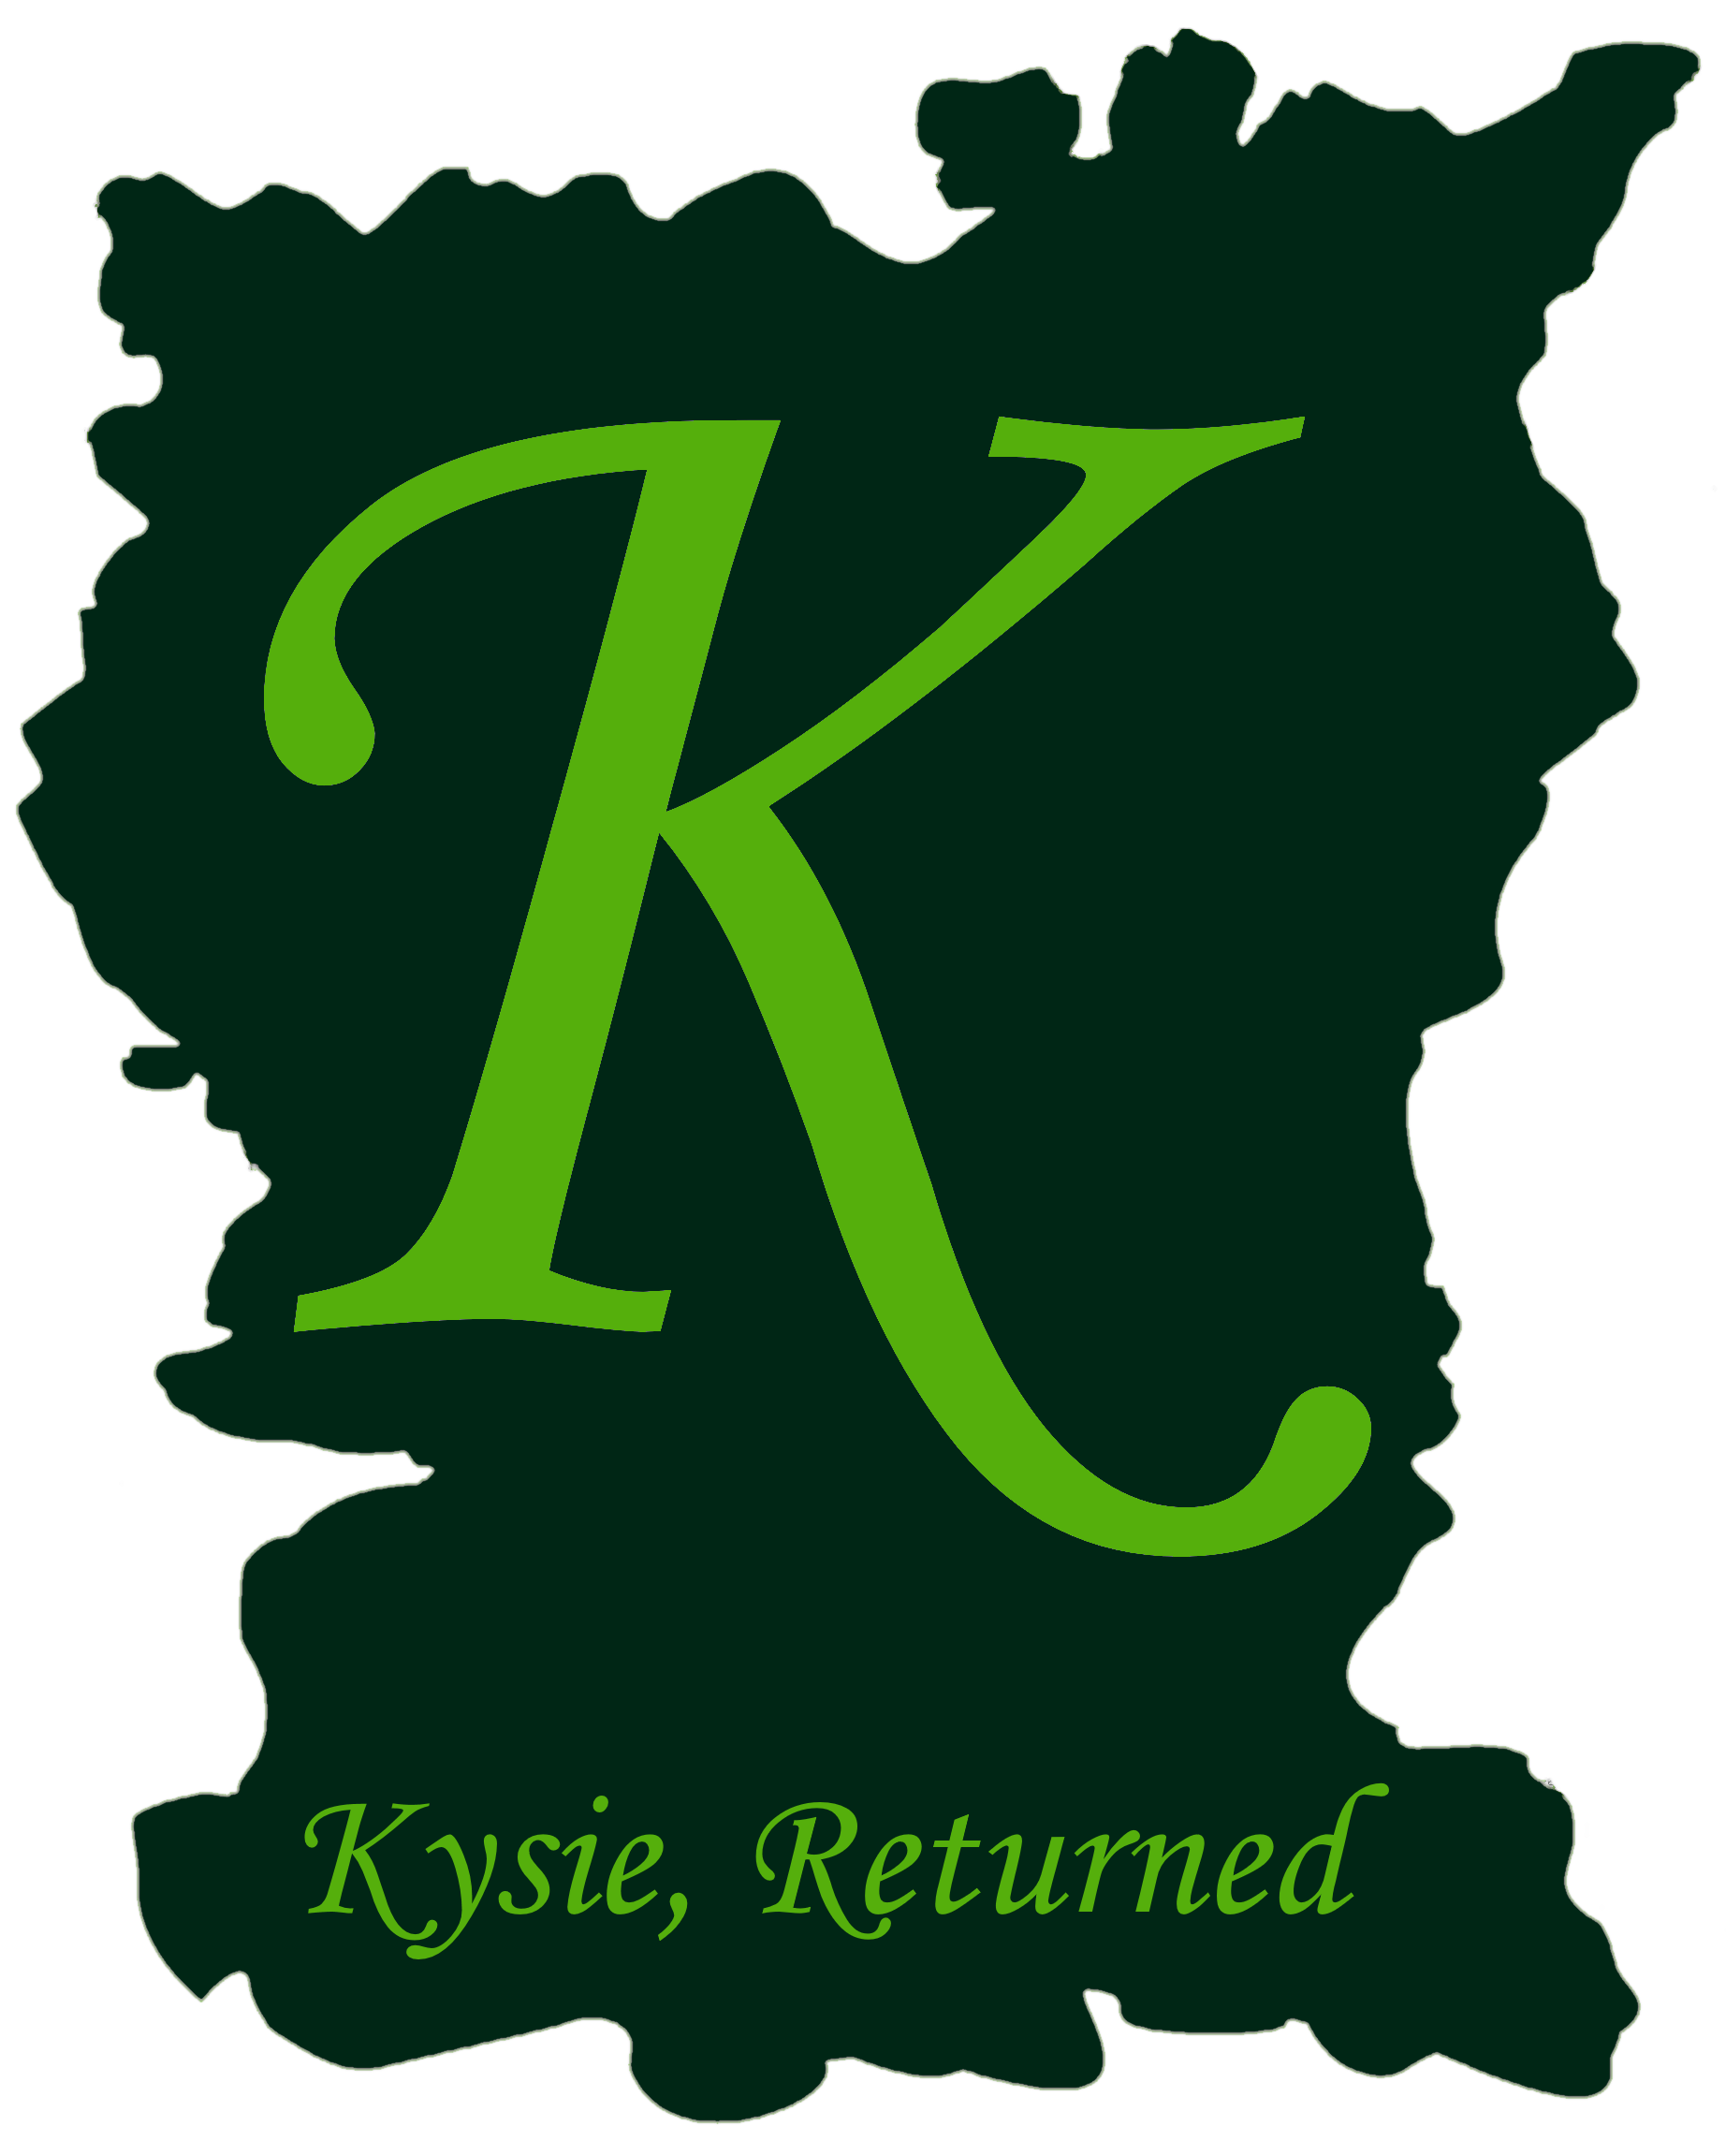 Click here for files related to the Kysie, Returned roleplaying setting and organized play group.